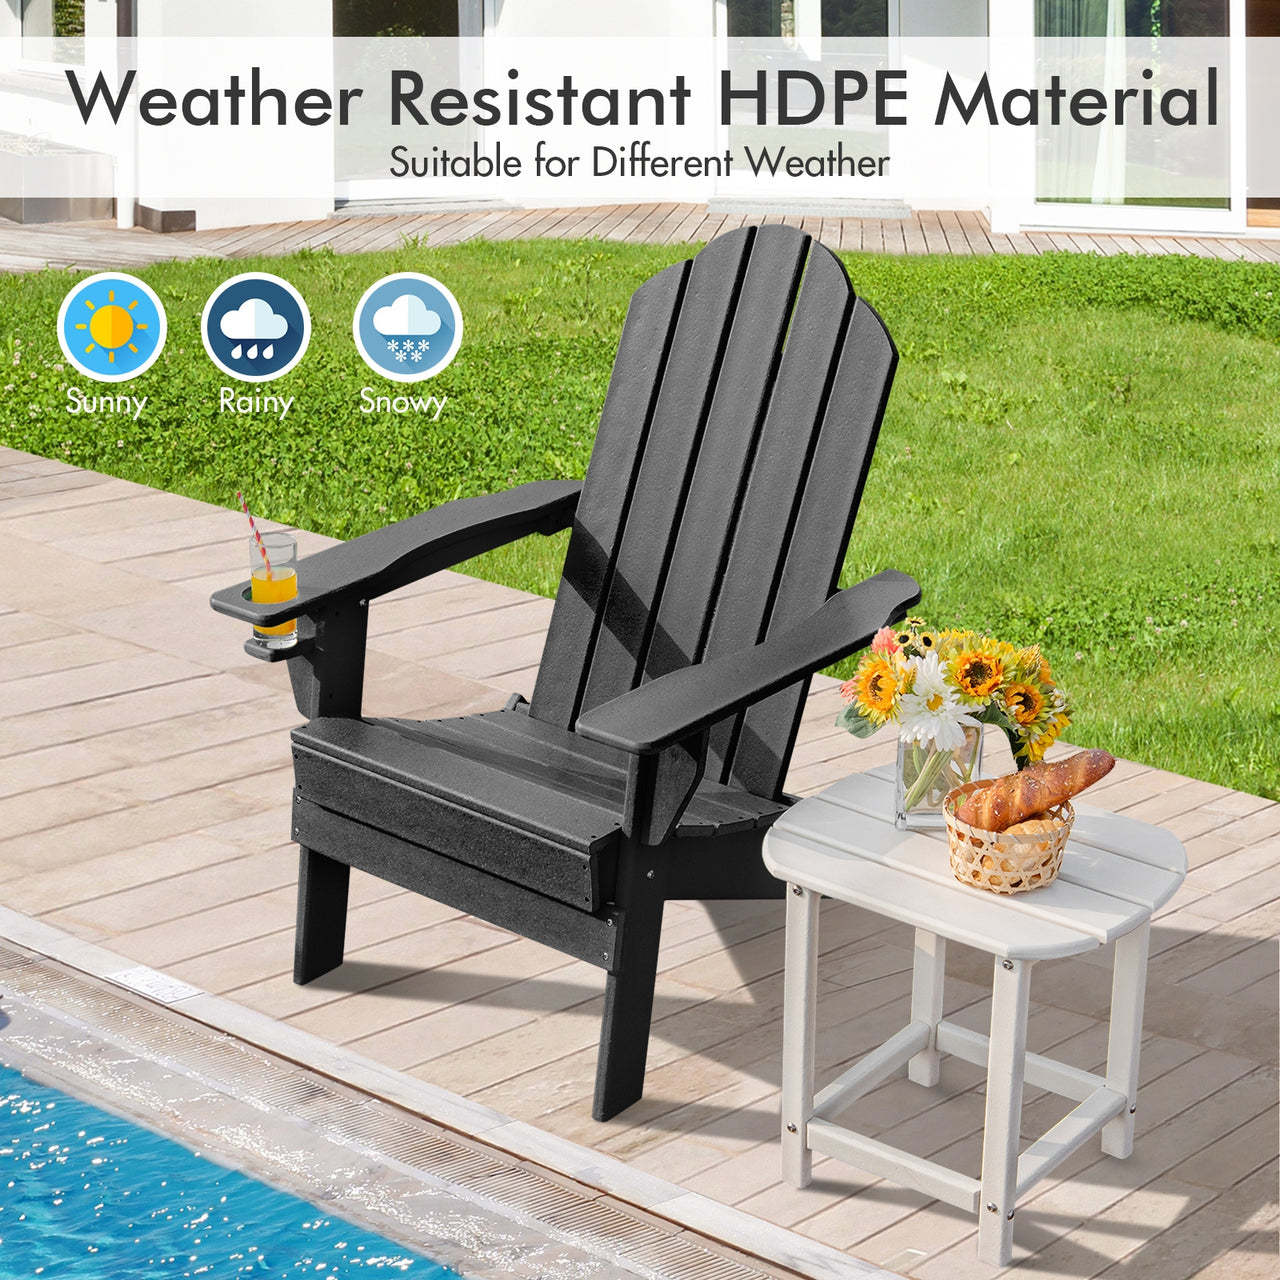 Foldable Weather Resistant Patio Chair with Built-in Cup Holder - Gallery View 3 of 10